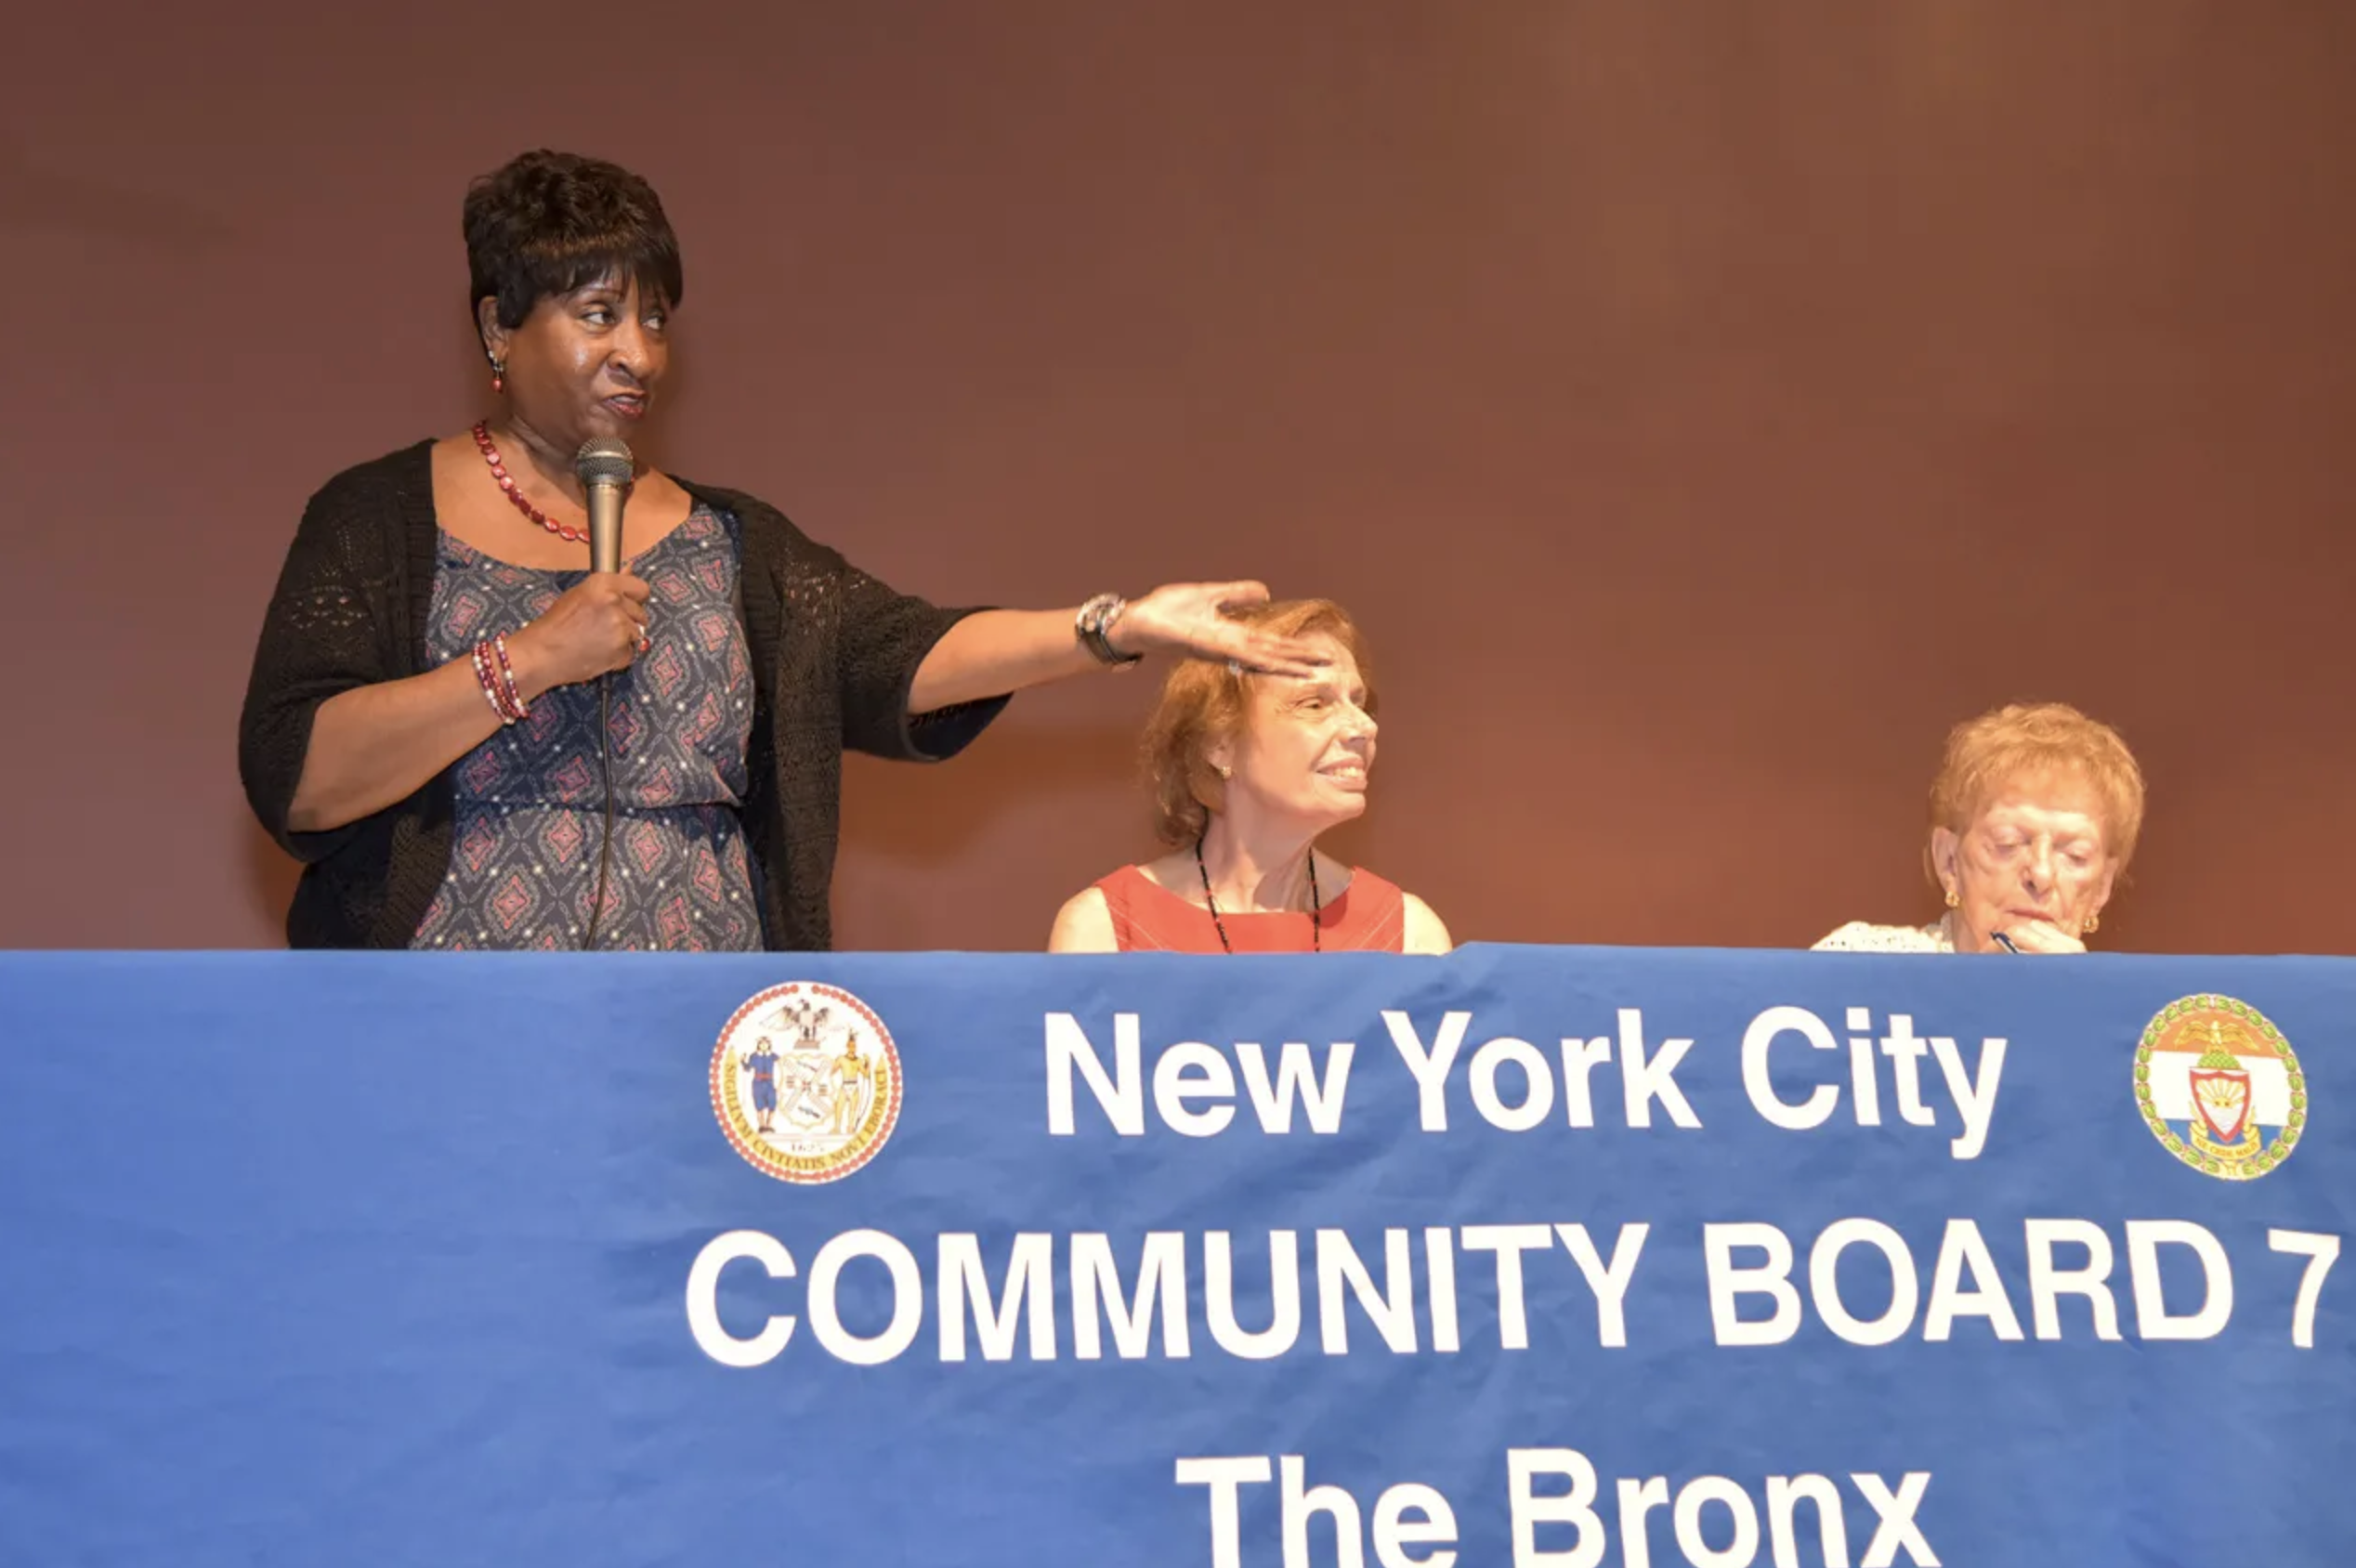 This is a photo of Community Board 7 in the Bronx.